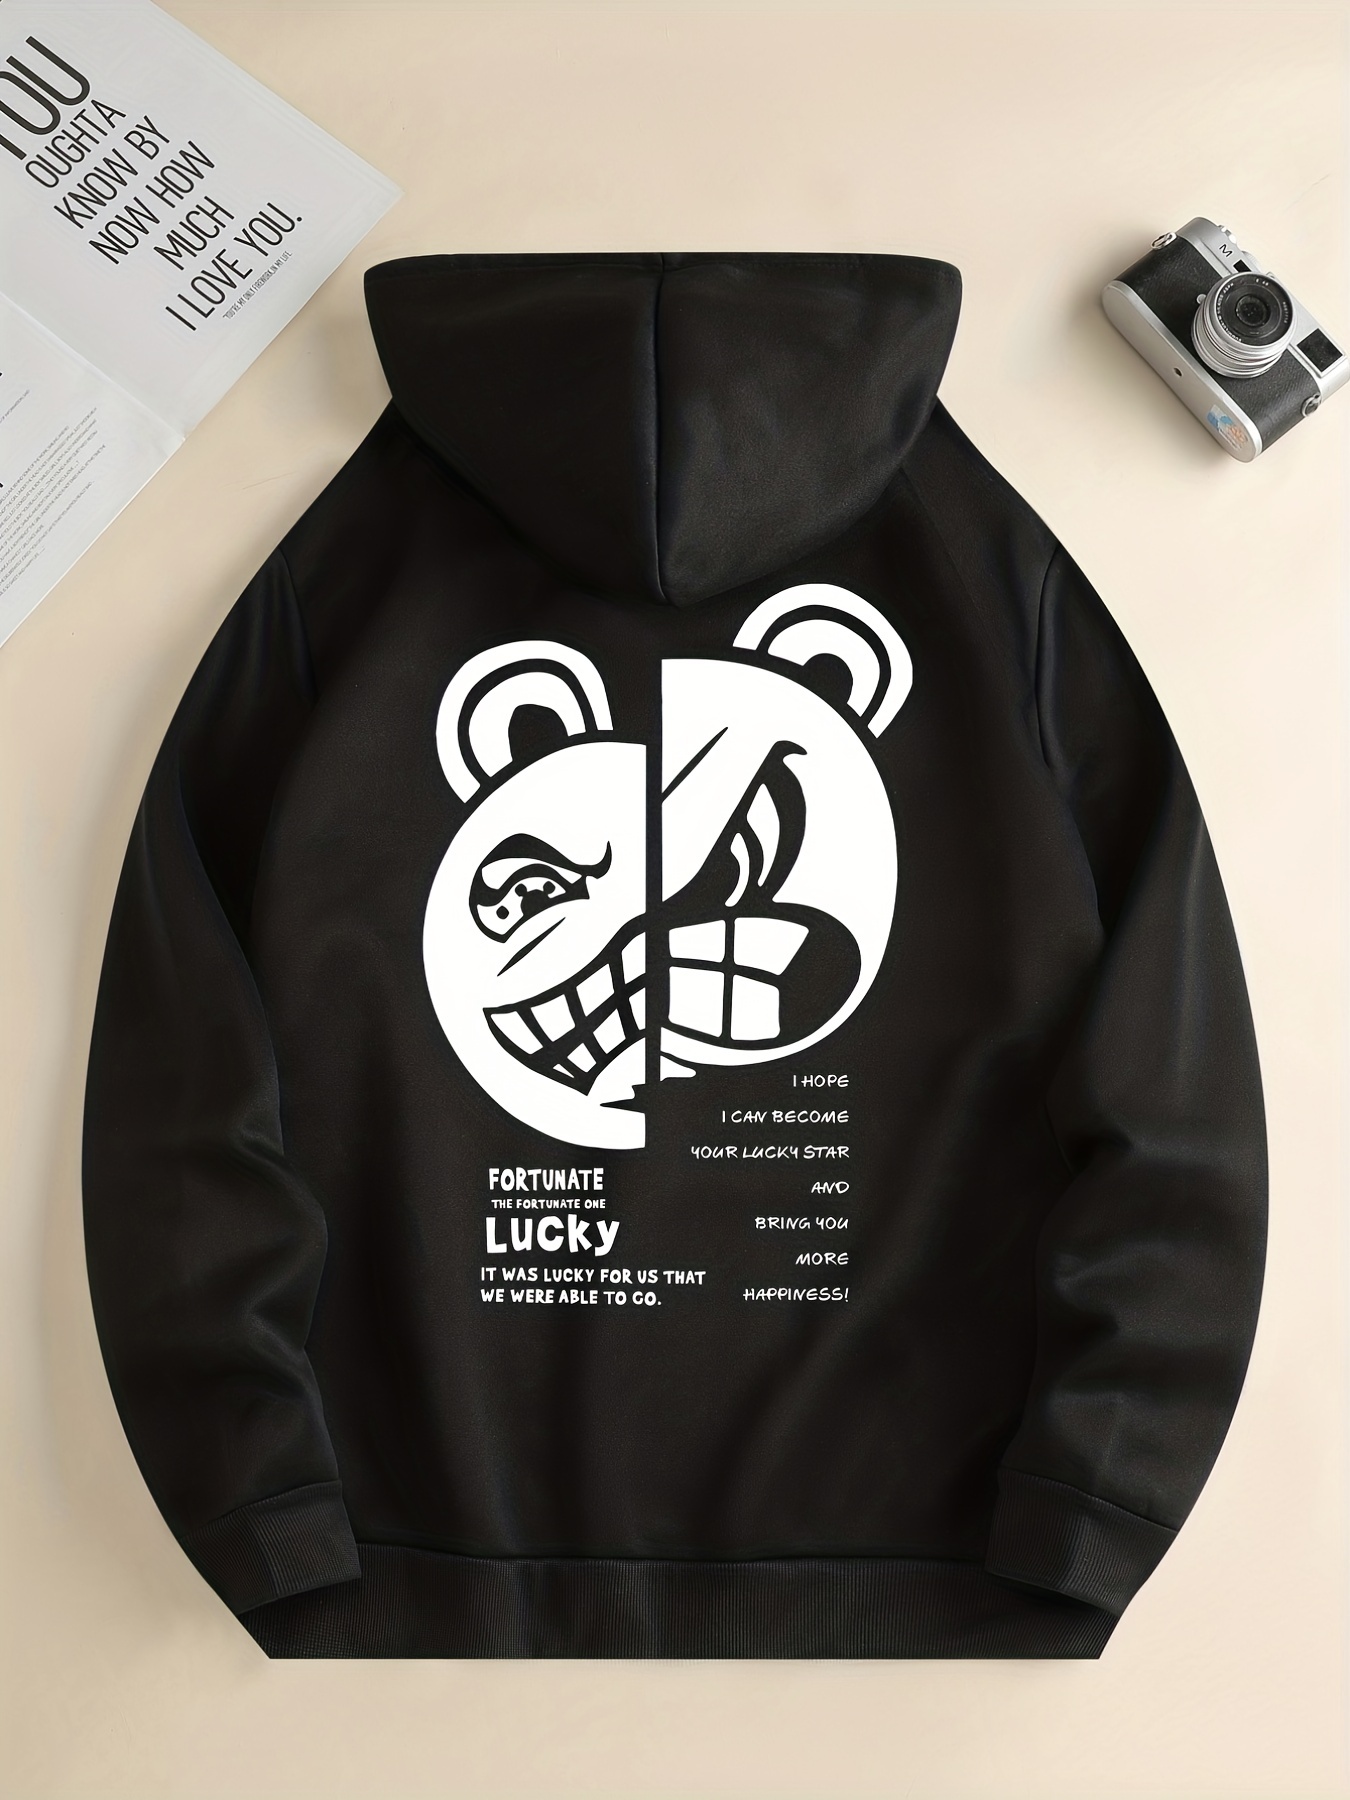 Angry Bear Print, Hoodies For Men, Graphic Sweatshirt With